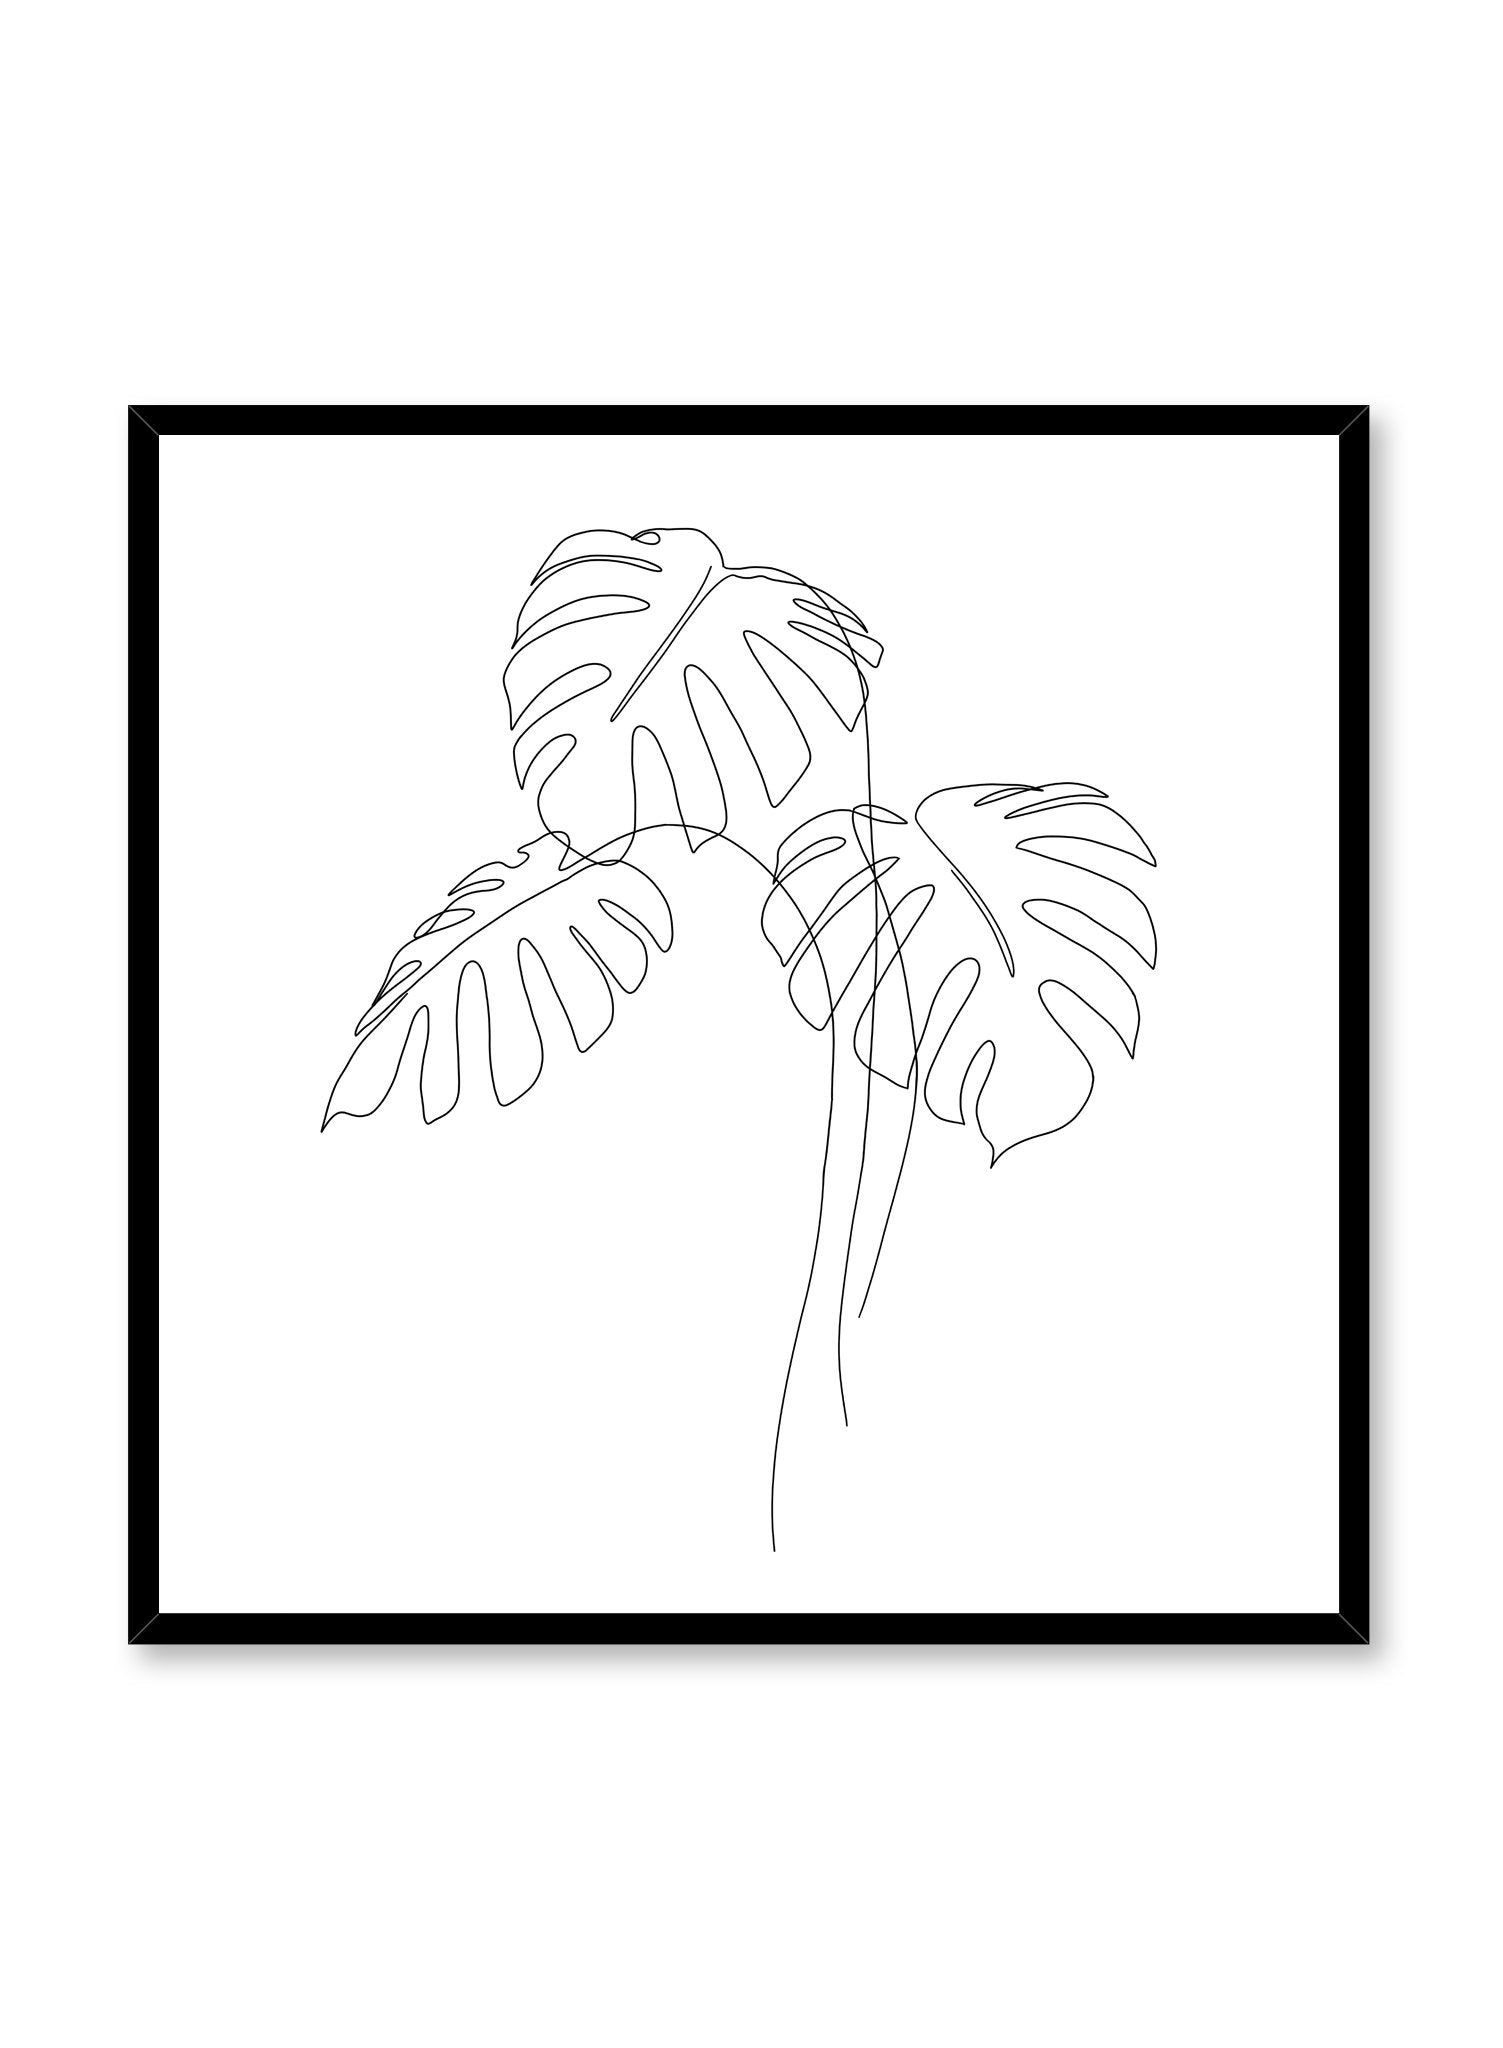 Modern minimalist poster by Opposite Wall with monstera leaf illustration - Monstera Trio in square format